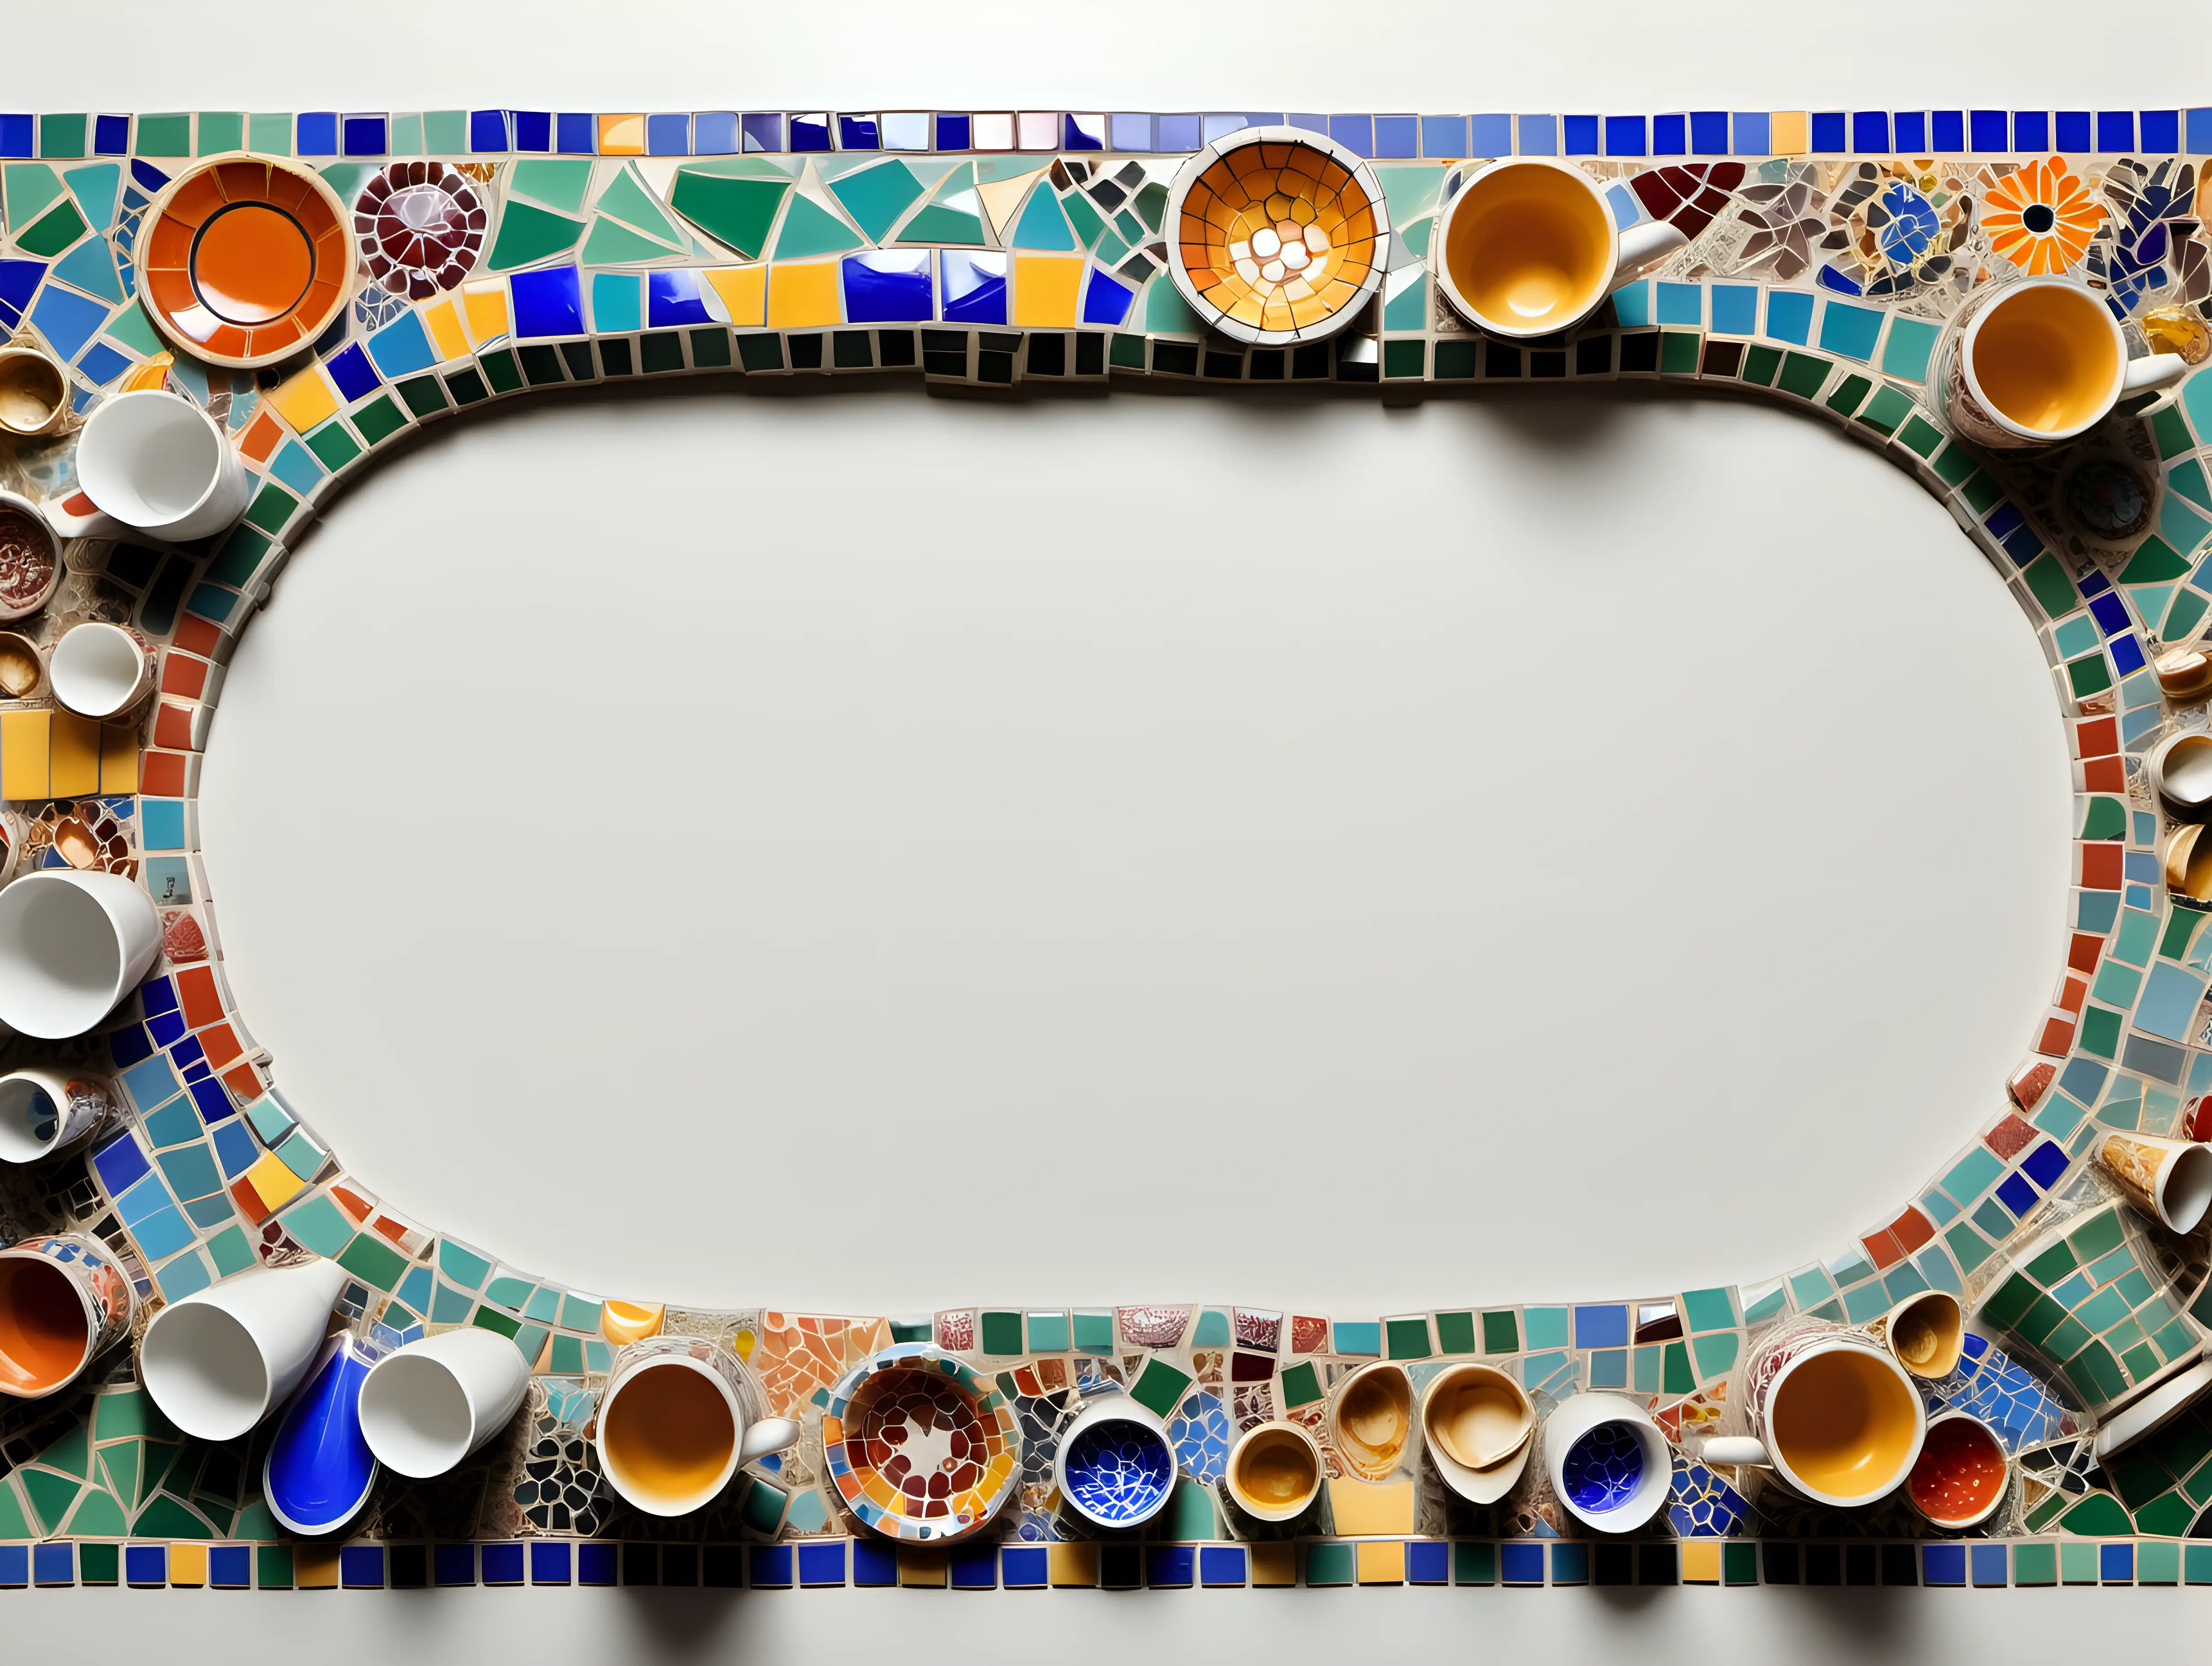 A mosaic border. Very colorful. Lots of details. Many shapes, colors, and sizes of mosaics and mini-figurines. Broken plates and cups. With a blank space with a shadow line in the middle. In the style of Gaudi